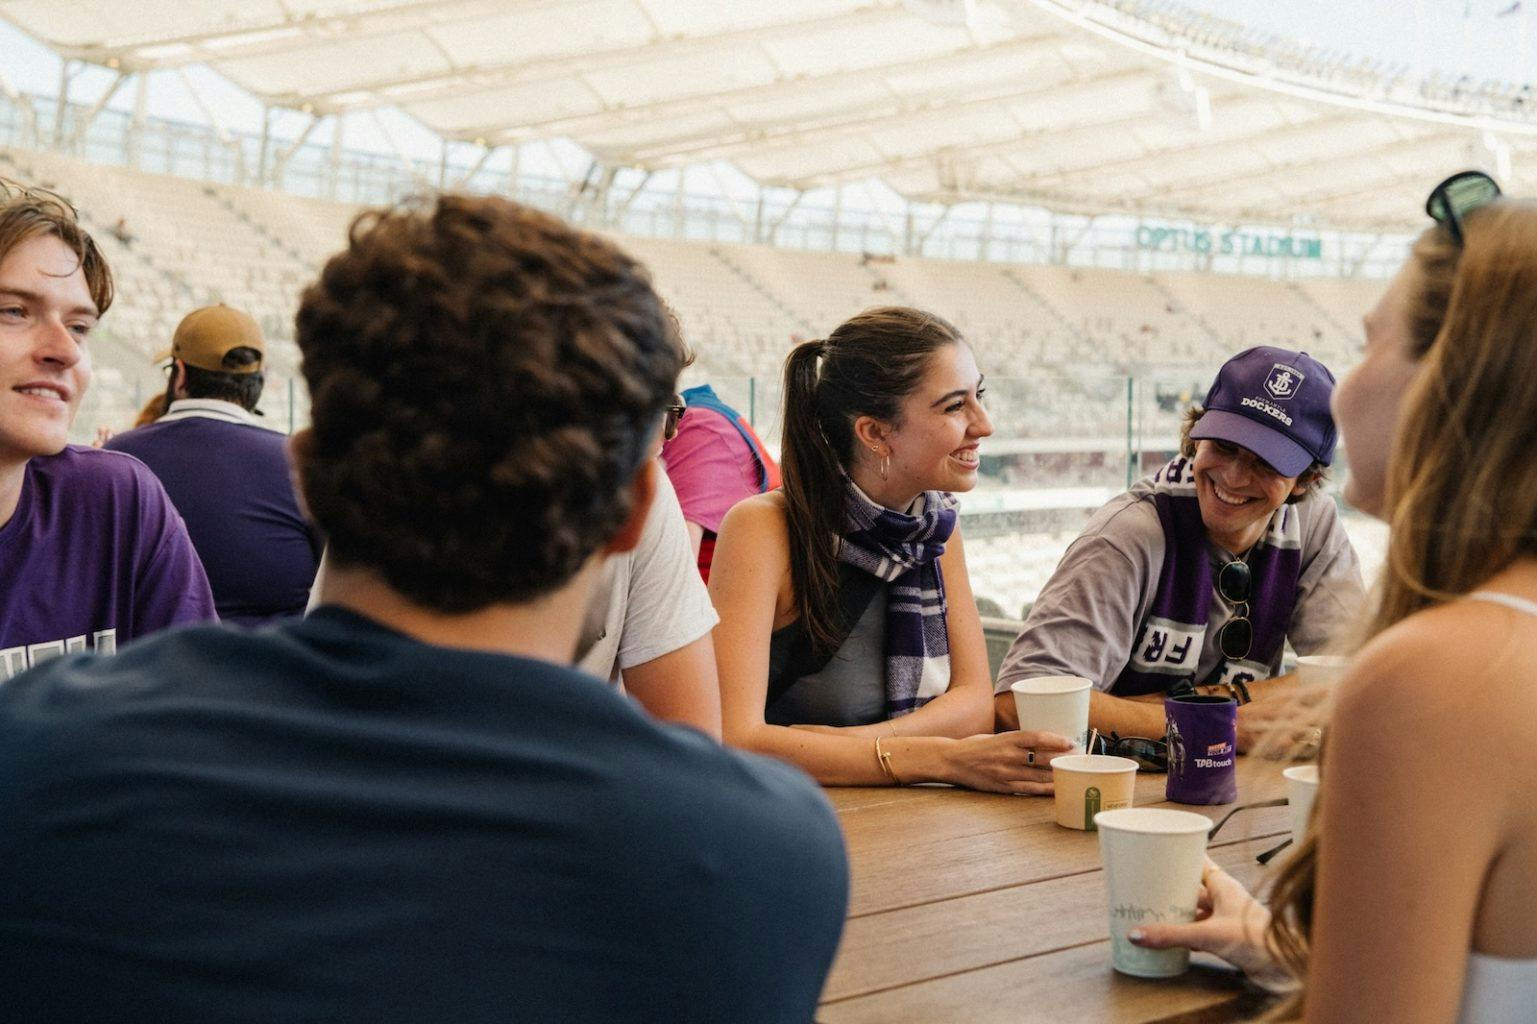 Fremantle Dockers home game experiences